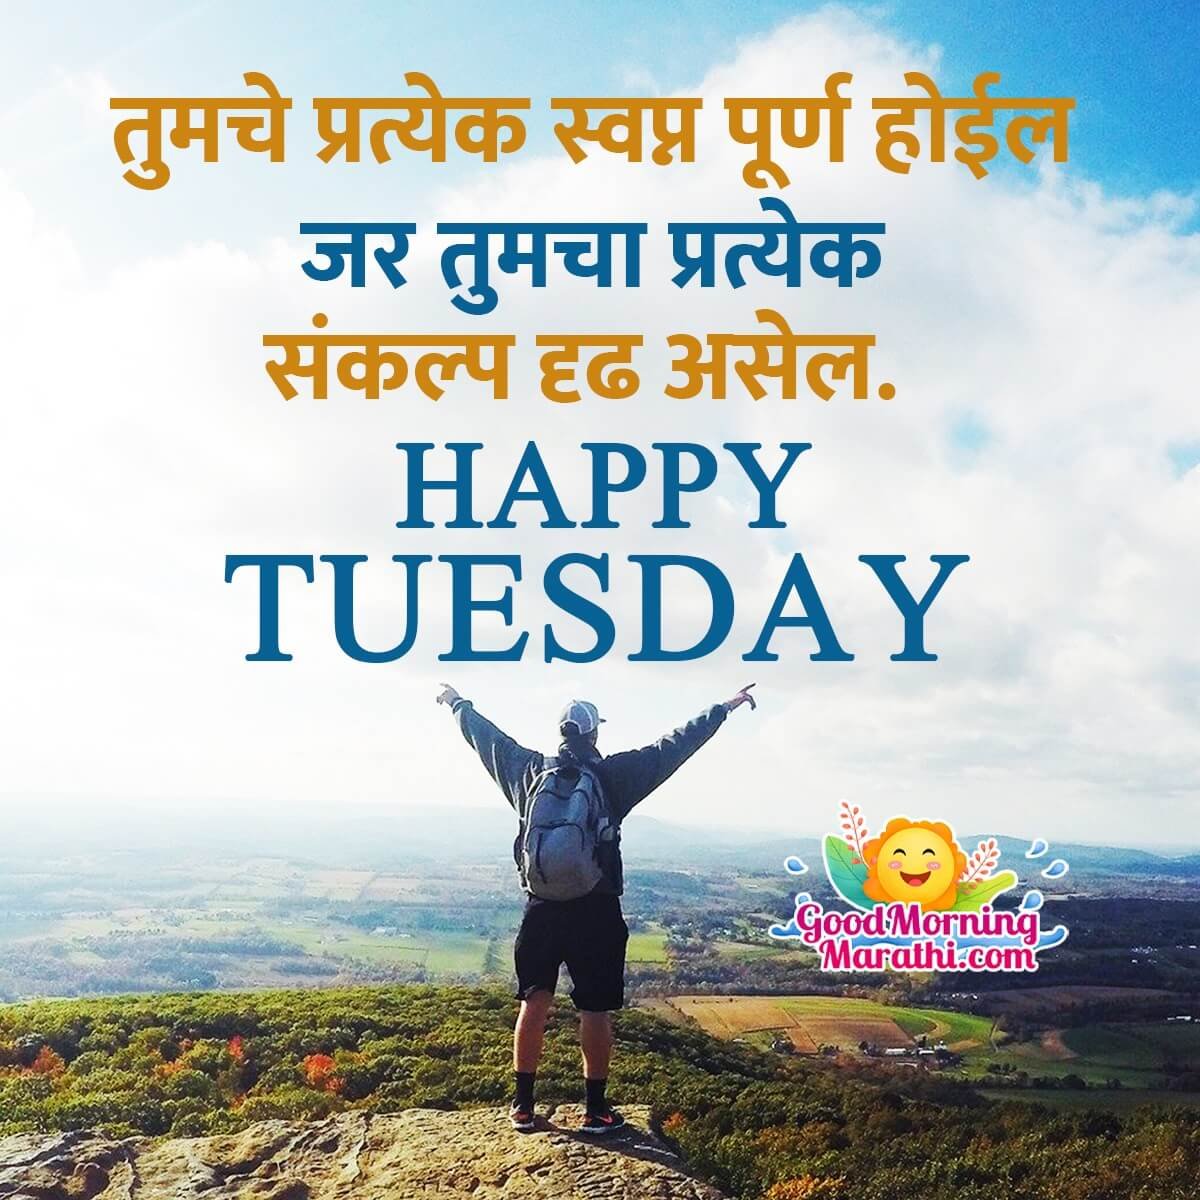 Happy Tuesday Message In Marathi